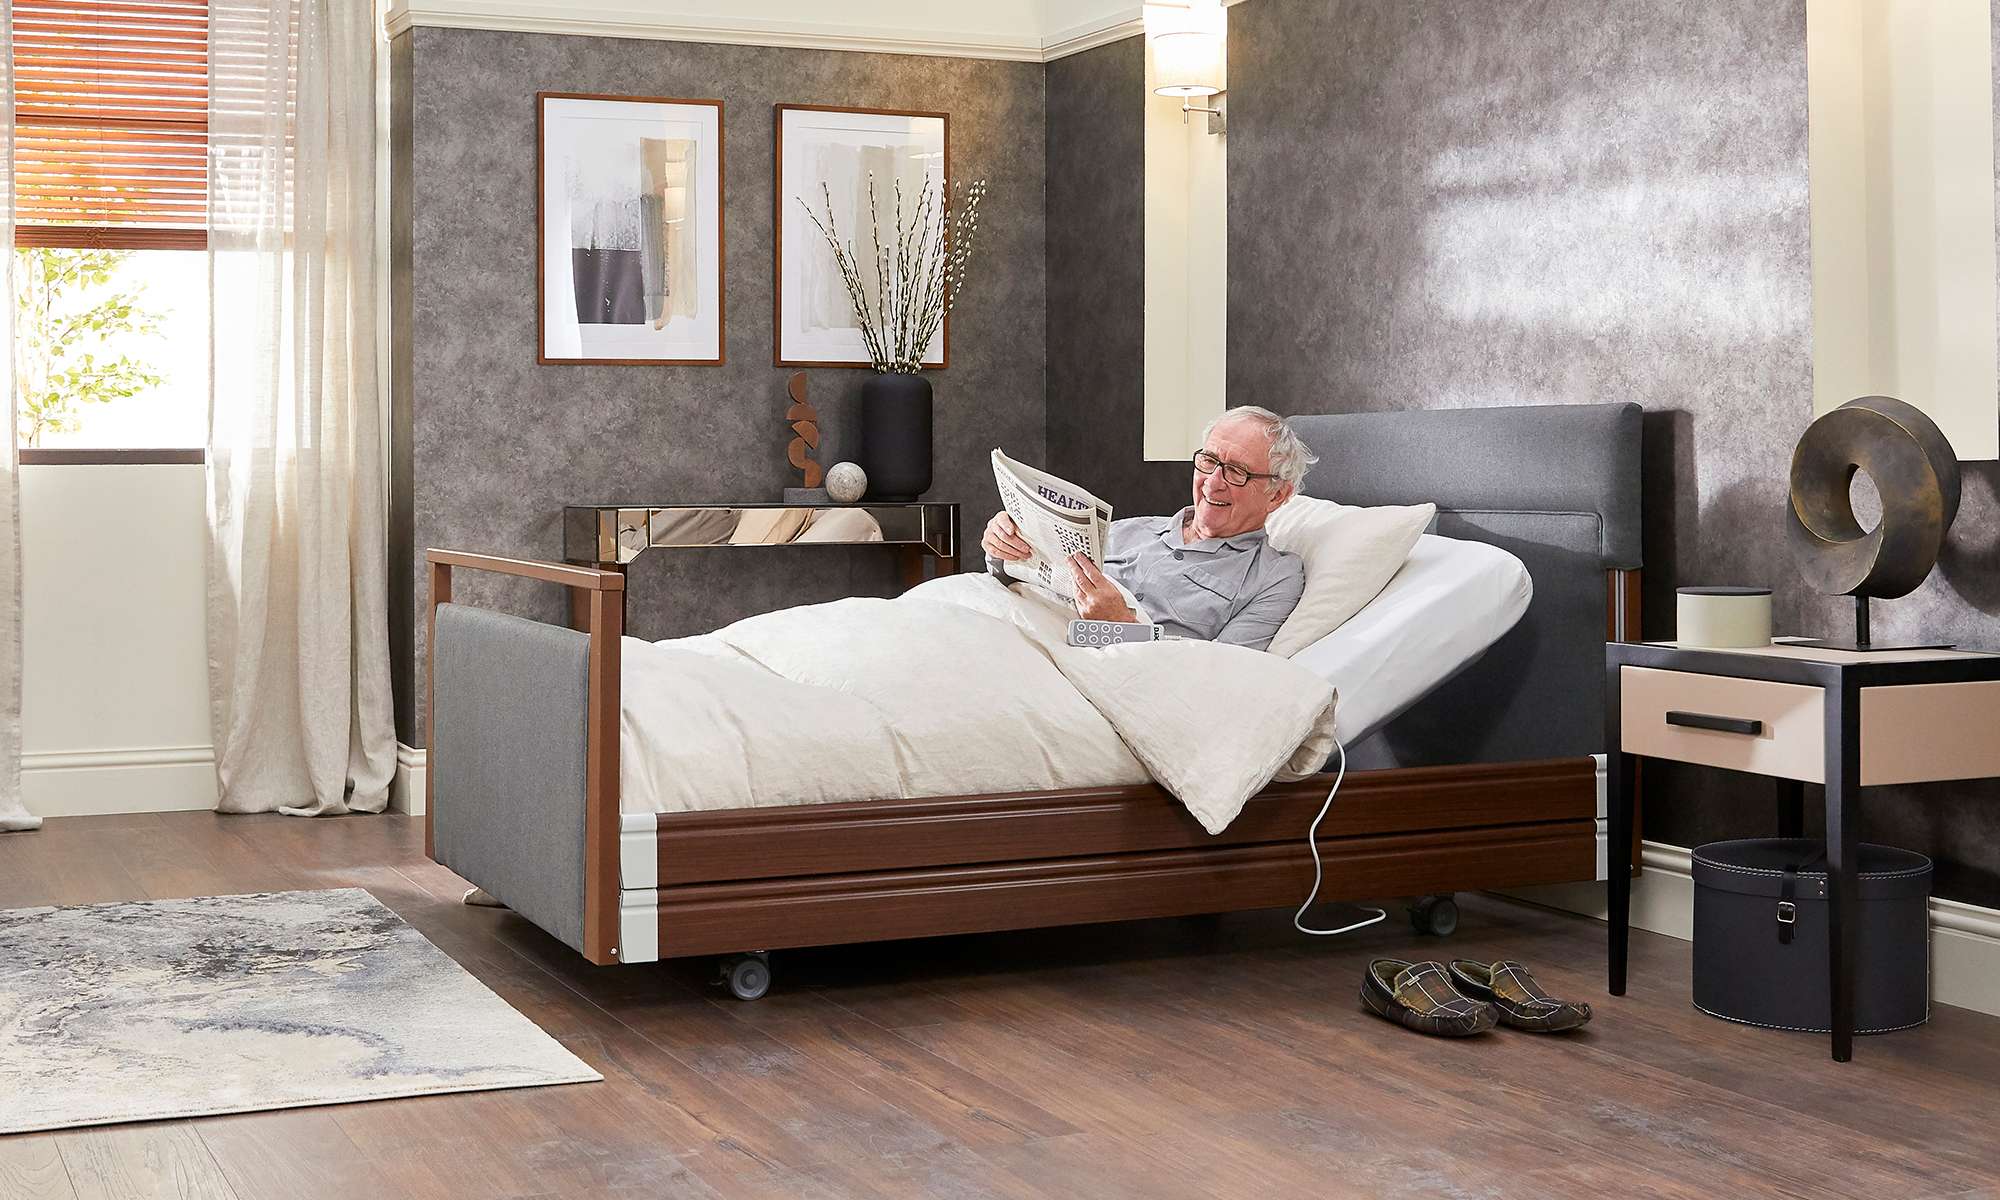 Elderly man on an electric profiling bed